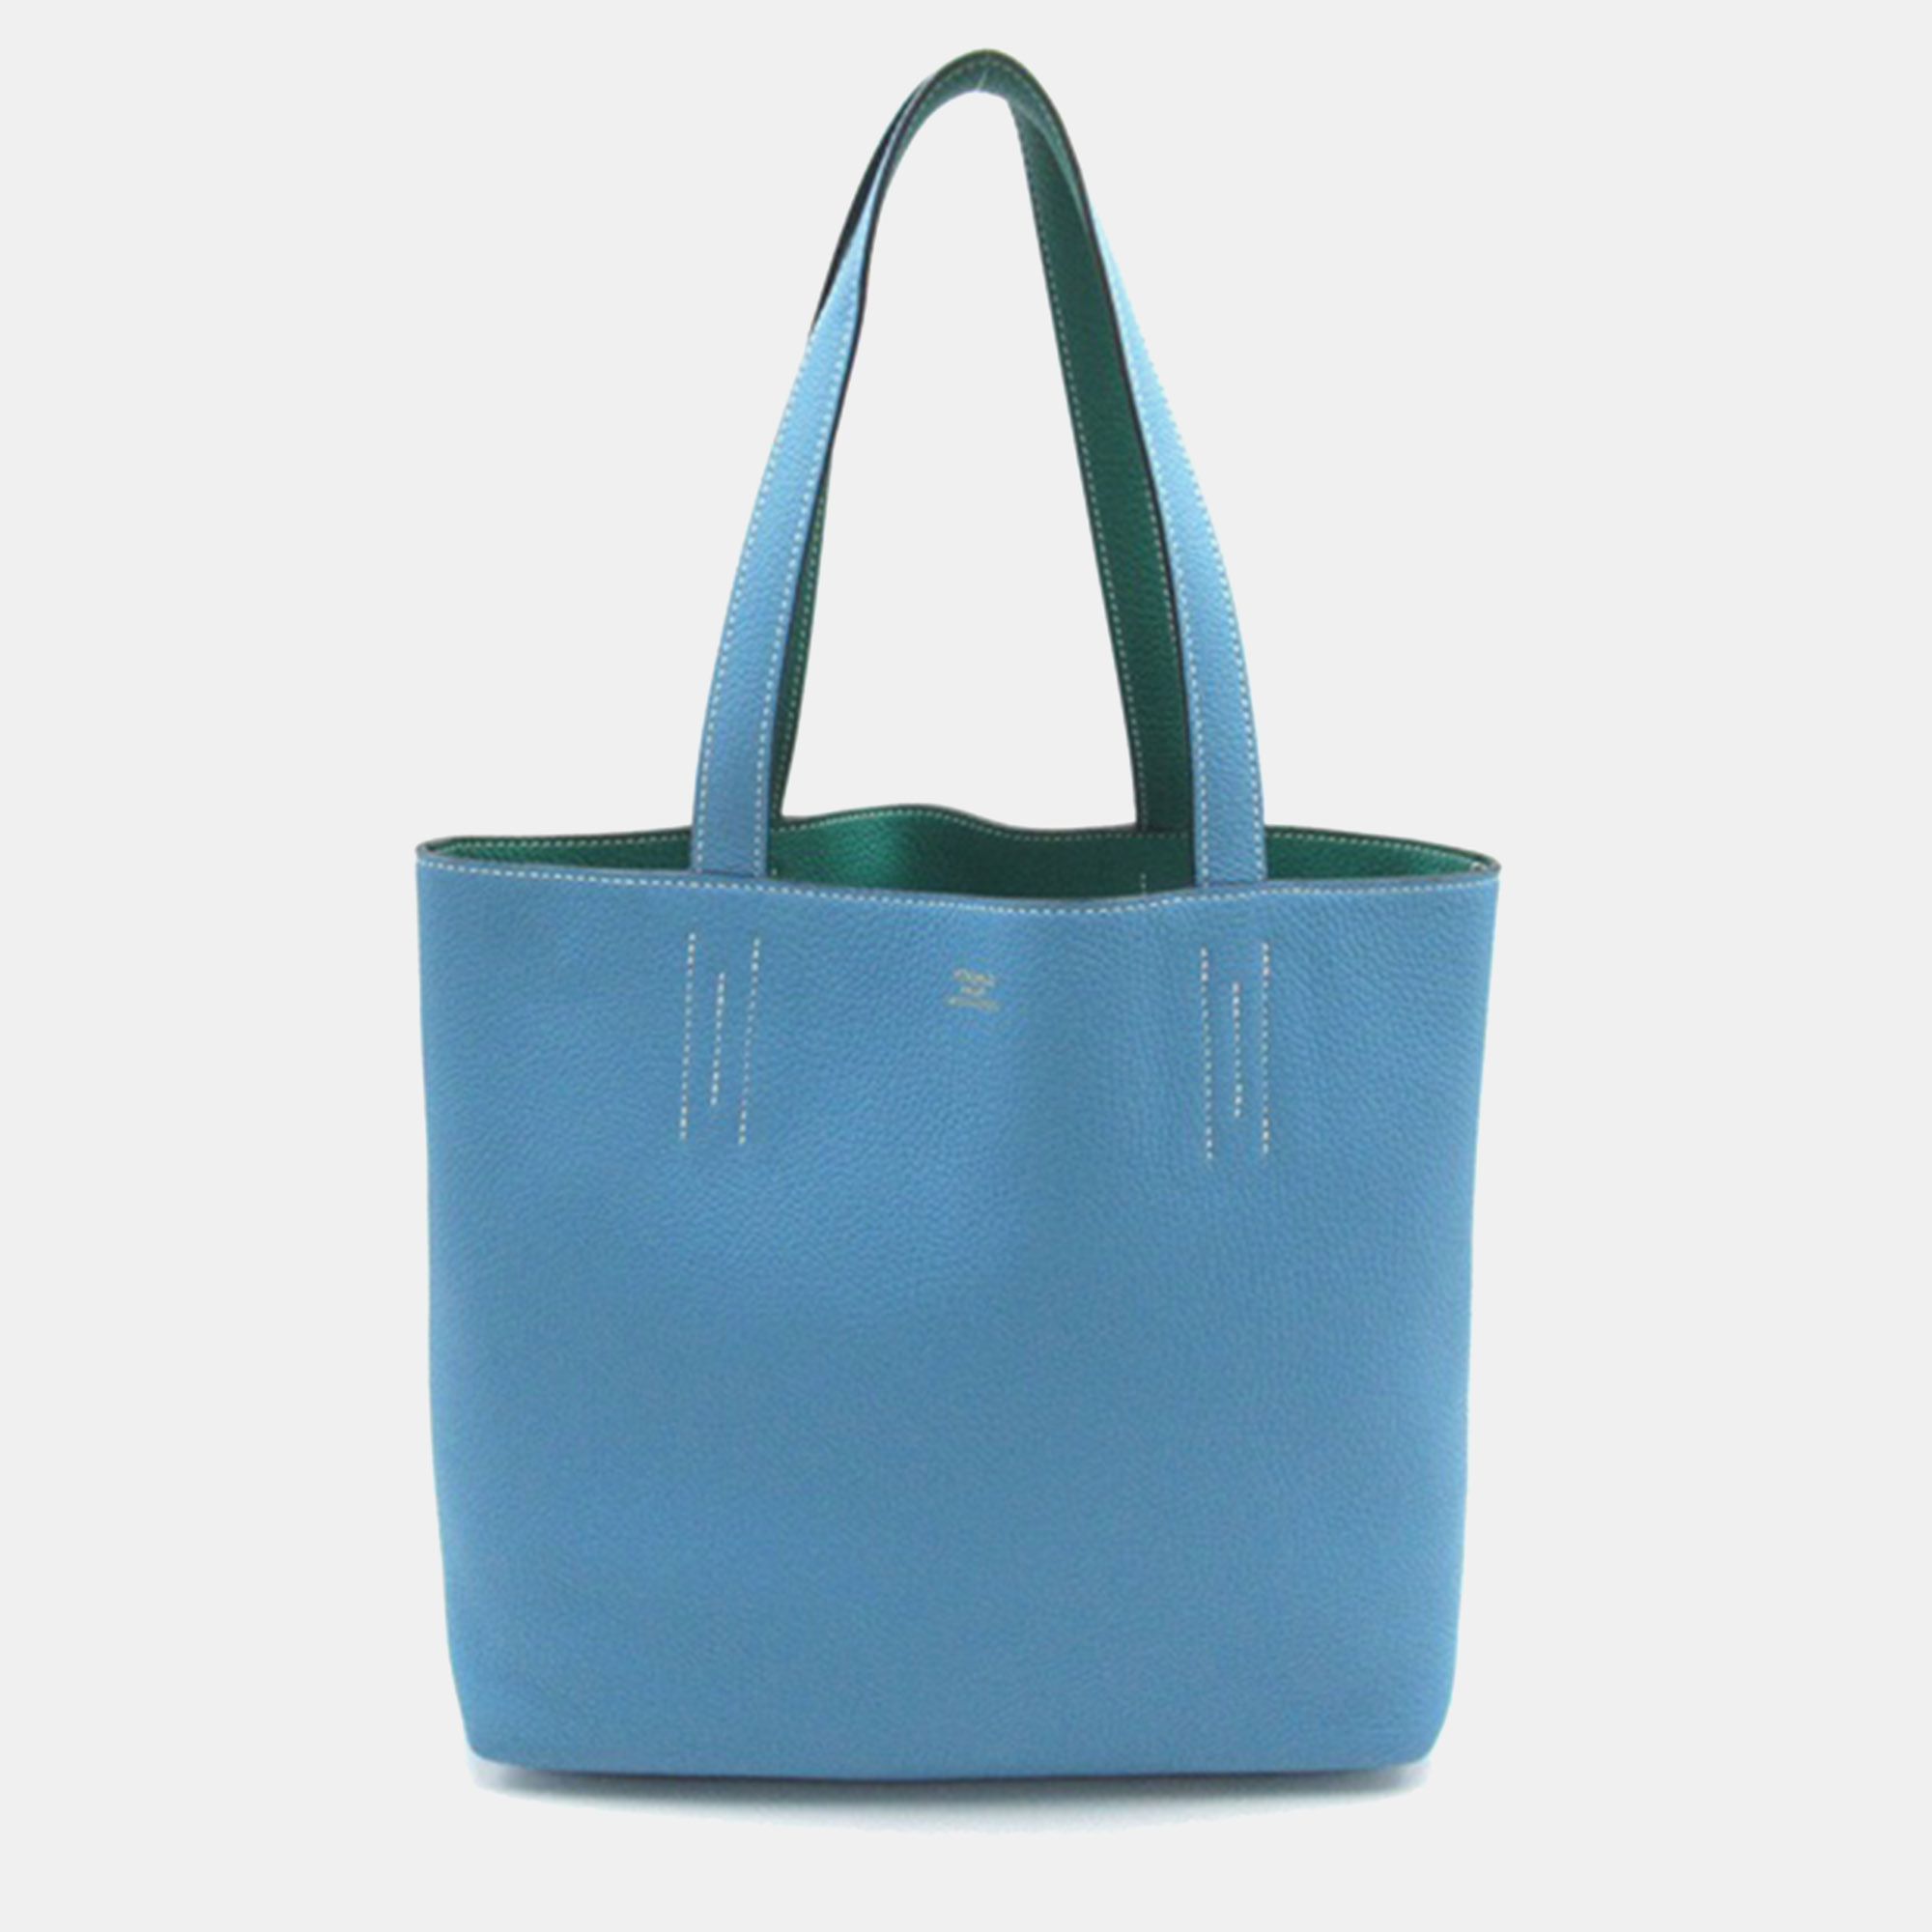 Hermes blue leather clemence double sens 28 reversible tote